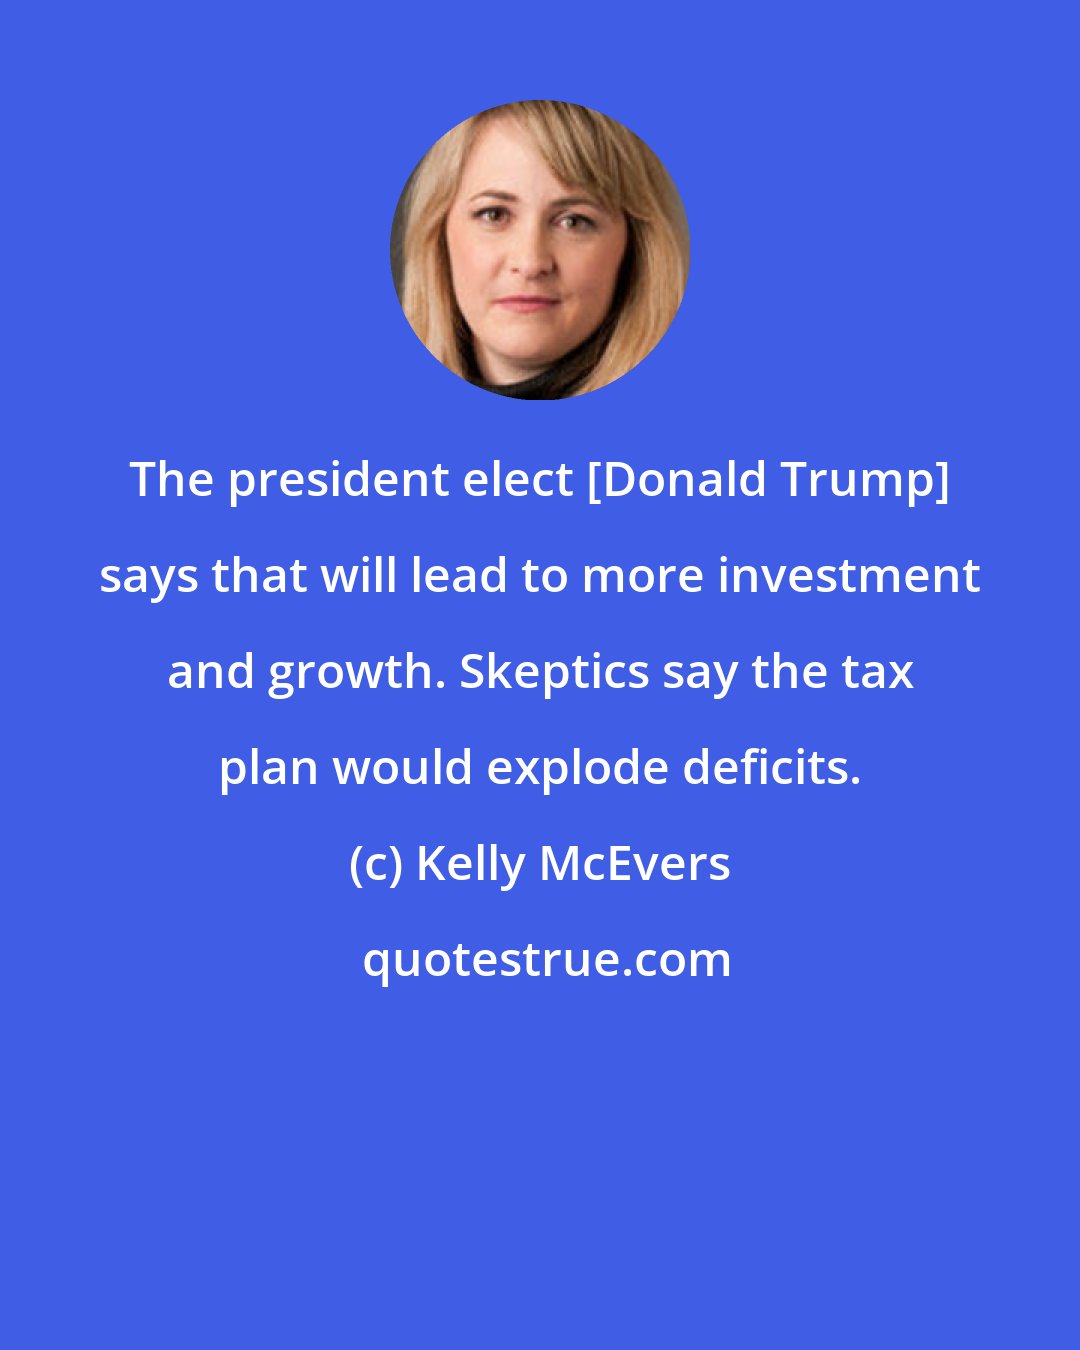 Kelly McEvers: The president elect [Donald Trump] says that will lead to more investment and growth. Skeptics say the tax plan would explode deficits.